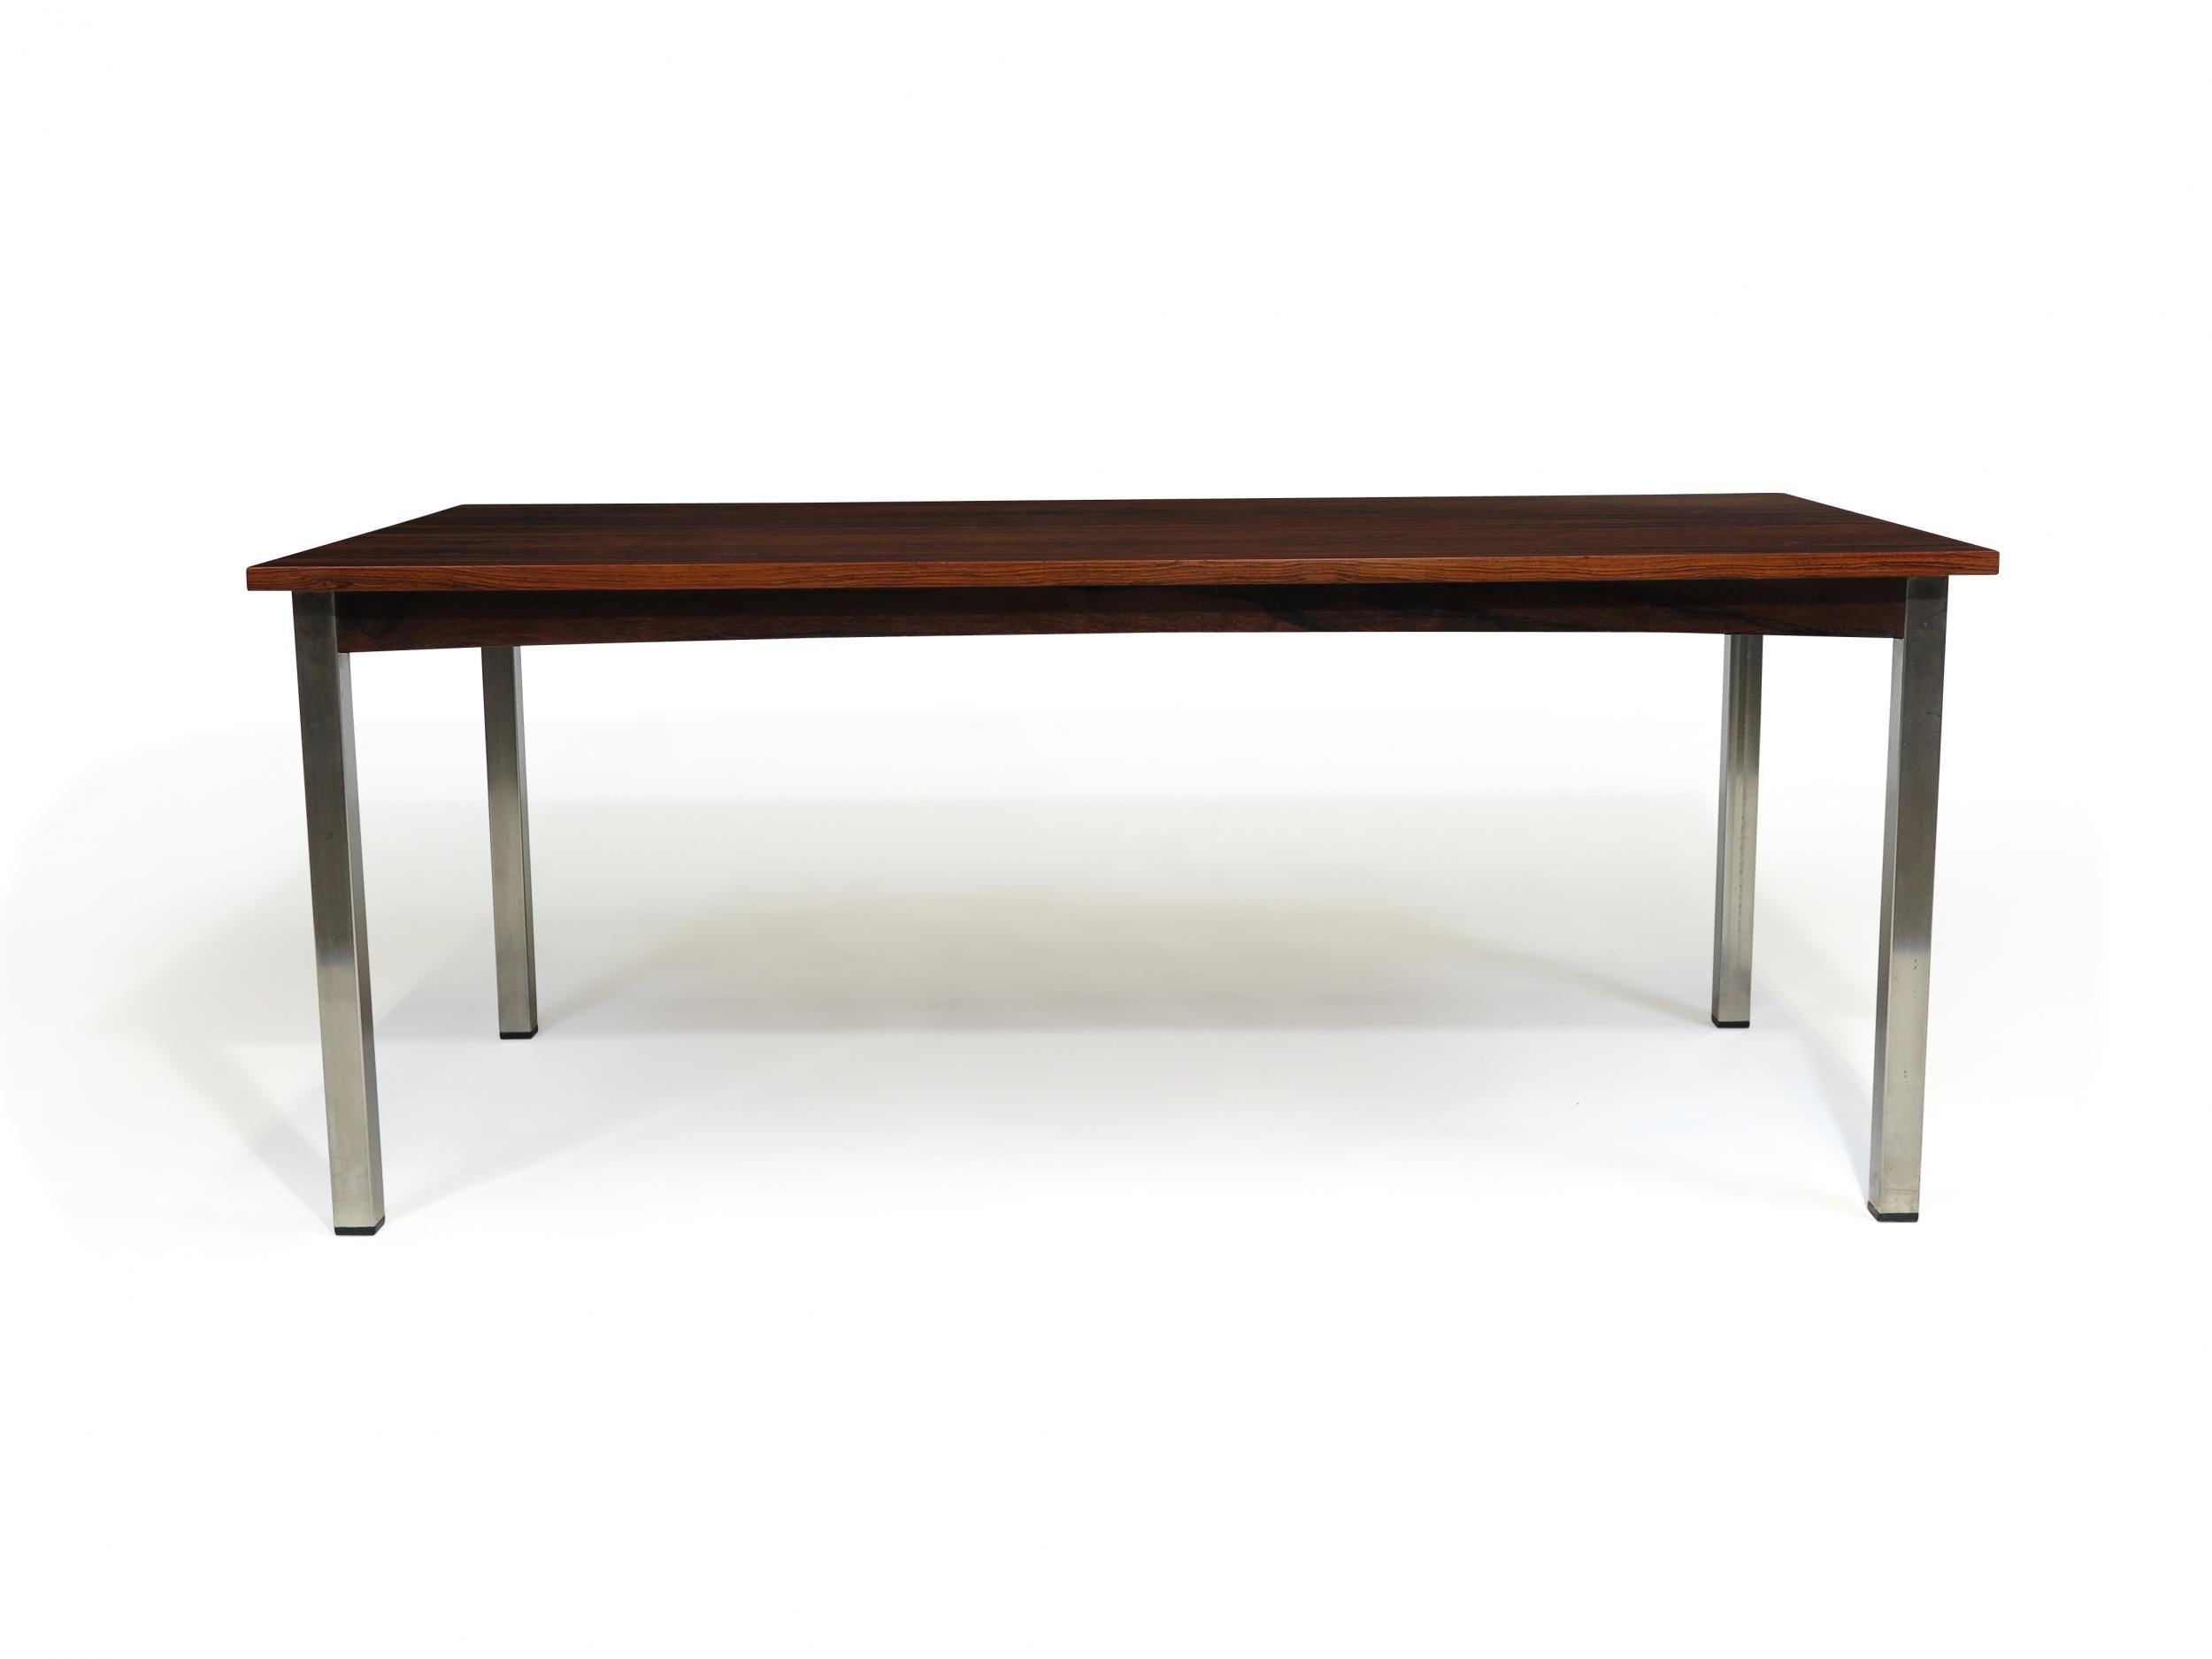 Midcentury rosewood coffee table circa 1970s Denmark. The coffee table crafted of book match rosewood veneer over solid wood core raised in metal legs.